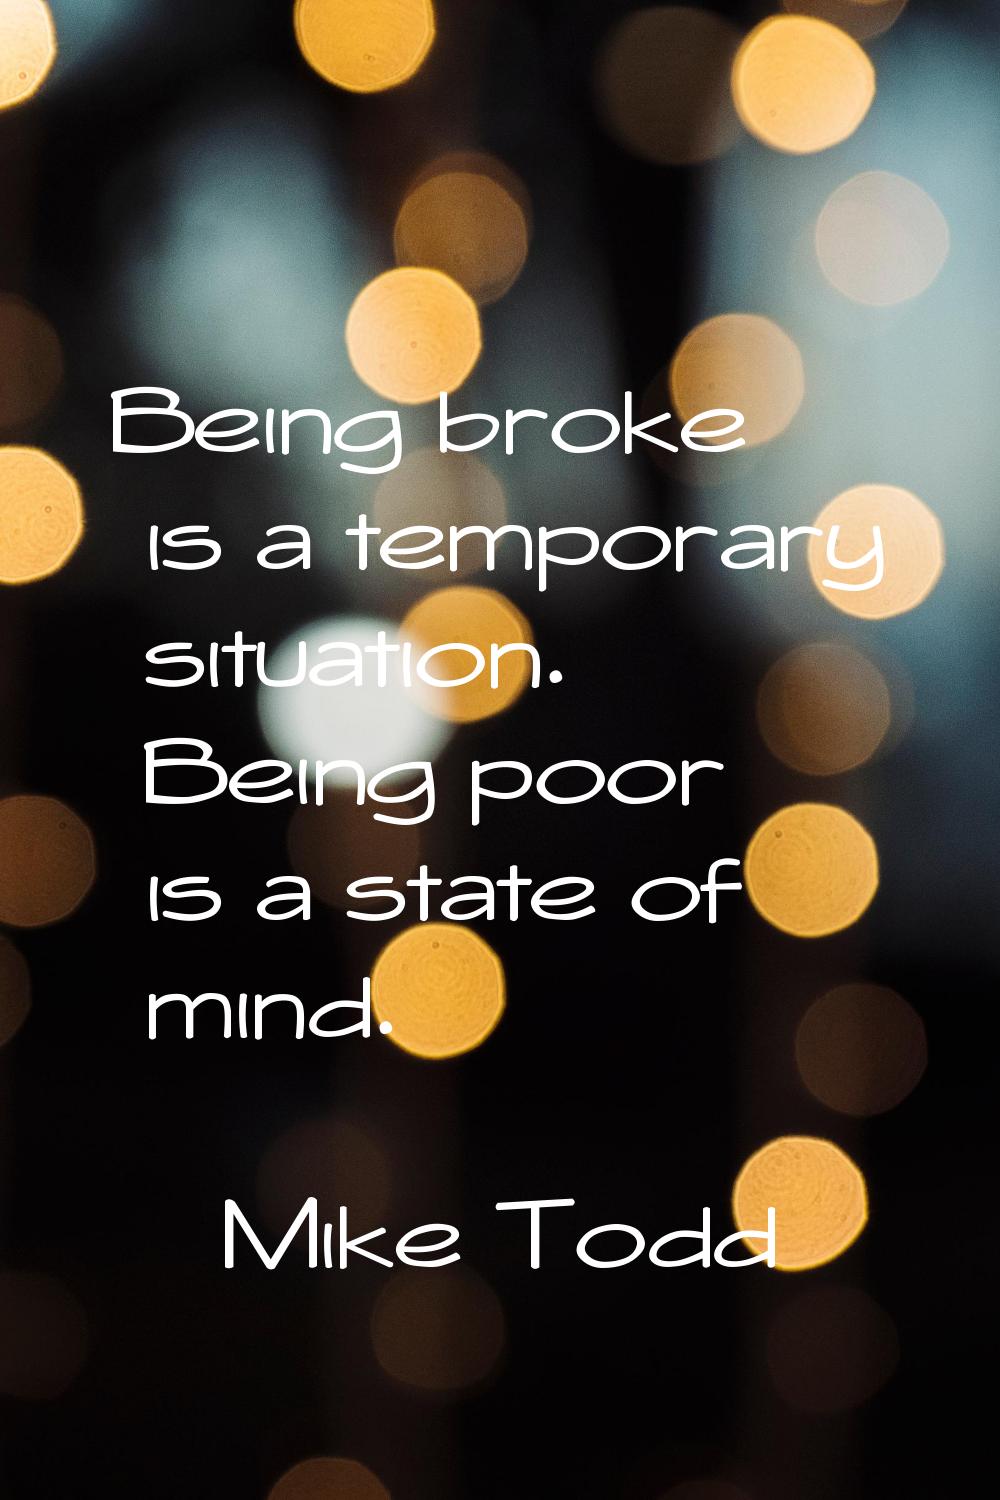 Being broke is a temporary situation. Being poor is a state of mind.